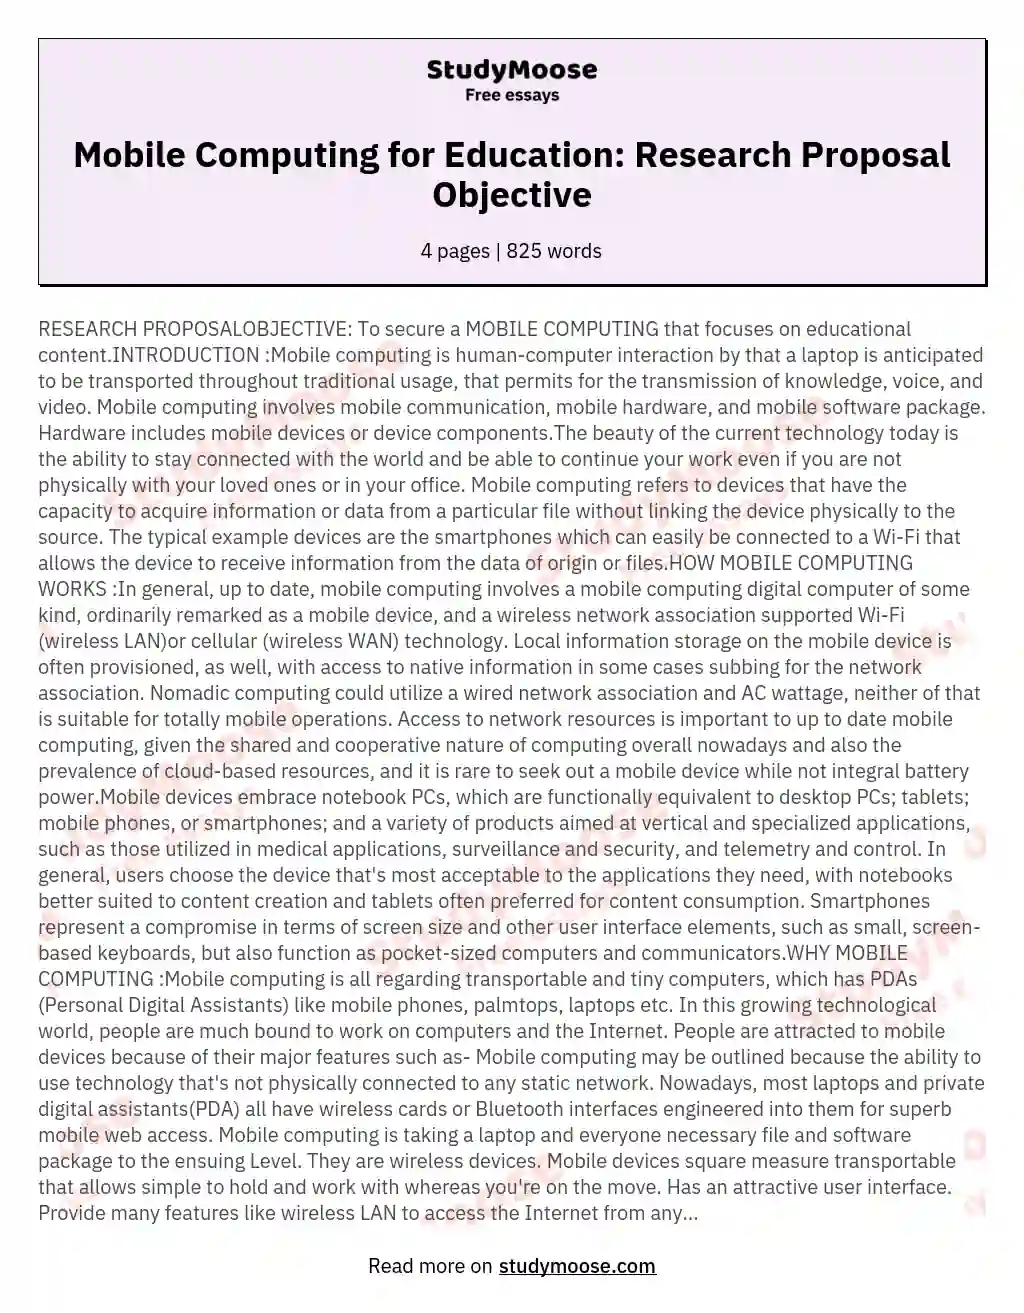 RESEARCH PROPOSALOBJECTIVE To secure a MOBILE COMPUTING that focuses on educational contentINTRODUCTION